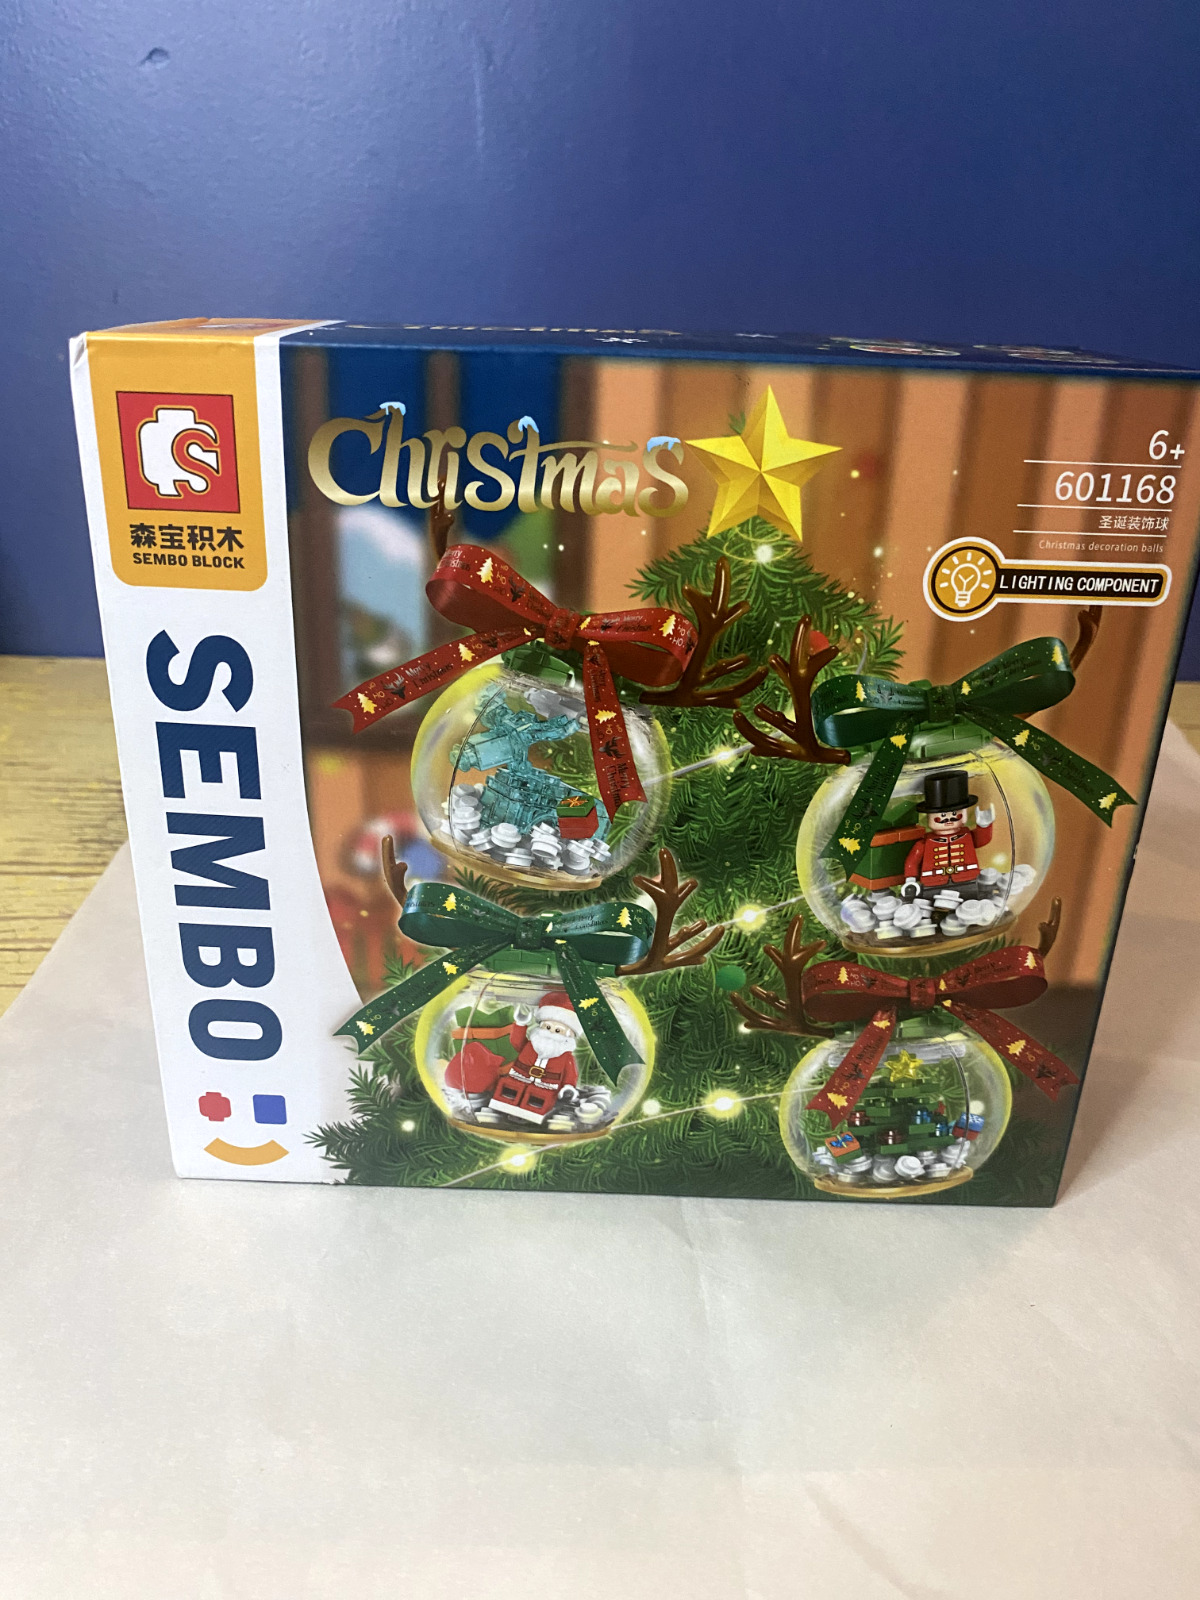 Sembo Blocks: Christmas Ornaments #601168 with lighting components New in Box